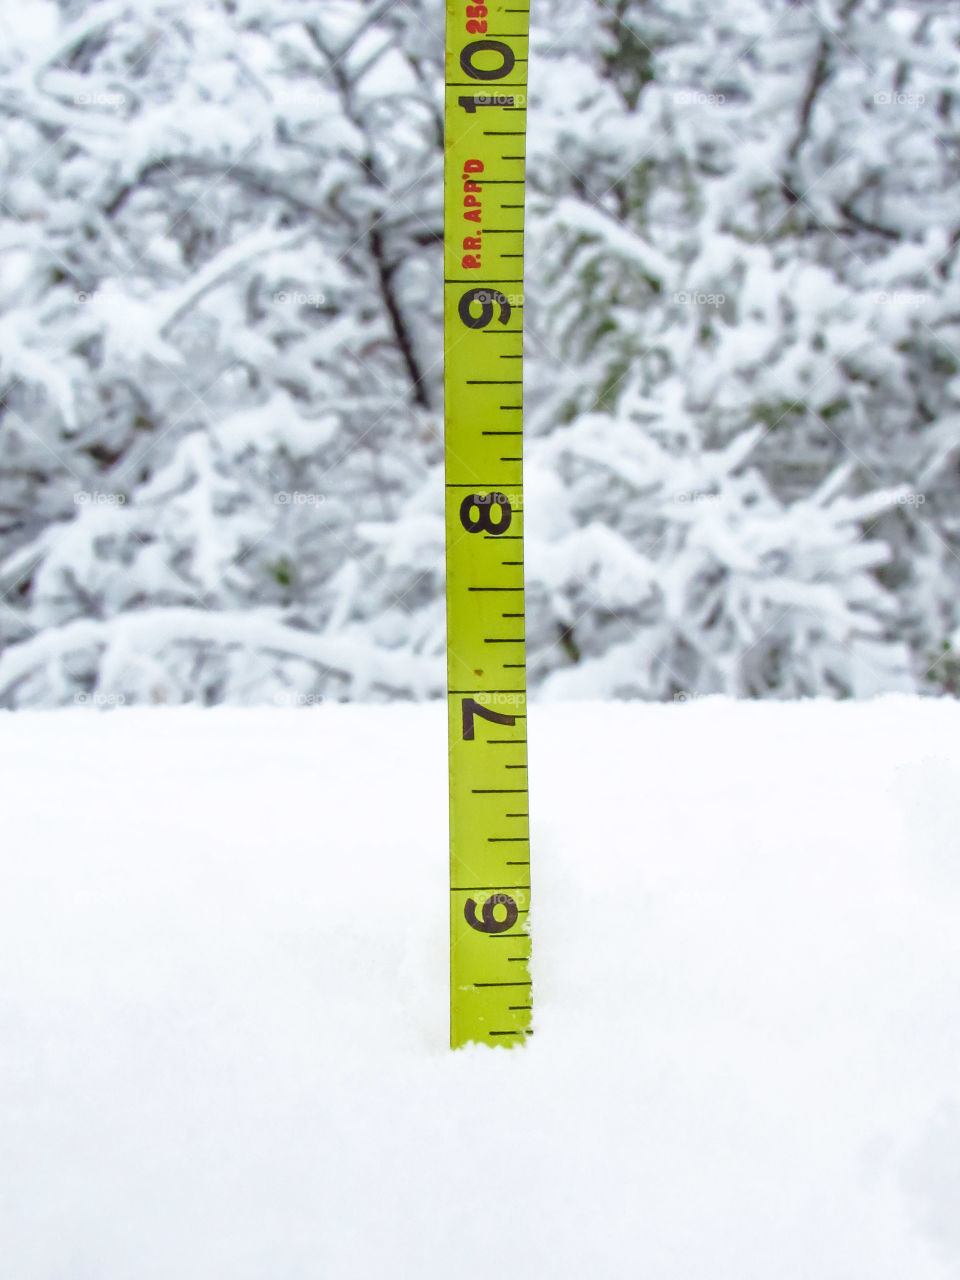 yellow tape measure measuring amount of snow fall